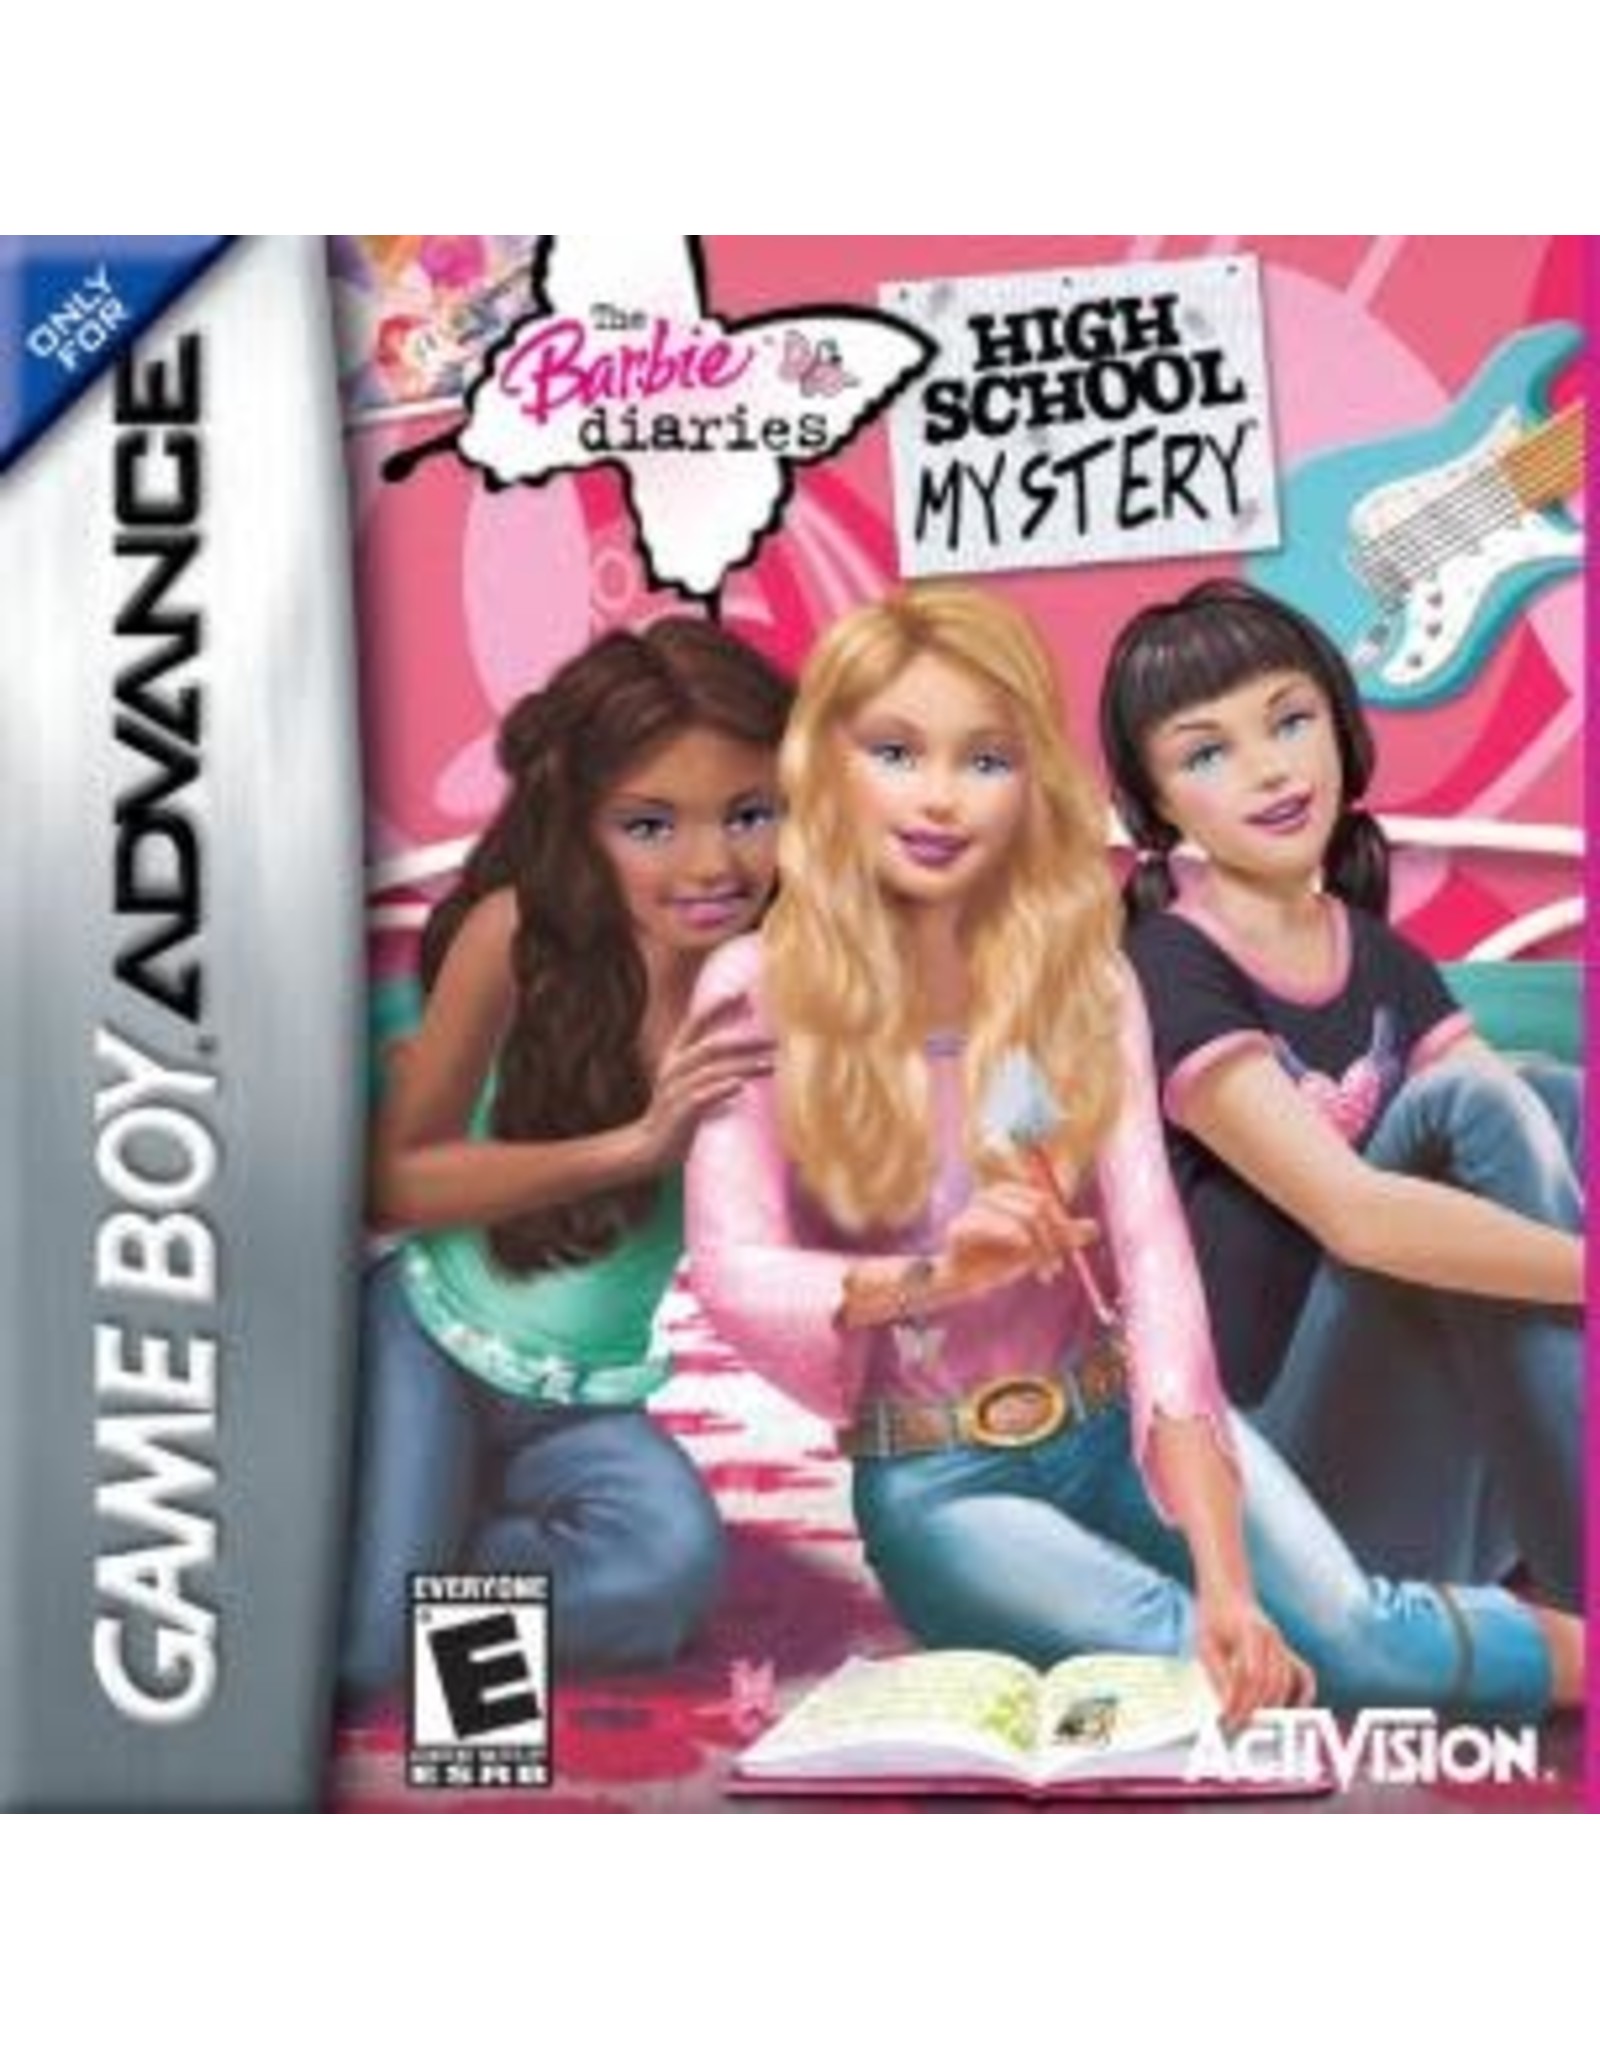 Game Boy Advance Barbie Diaries High School Mystery (Cart Only)